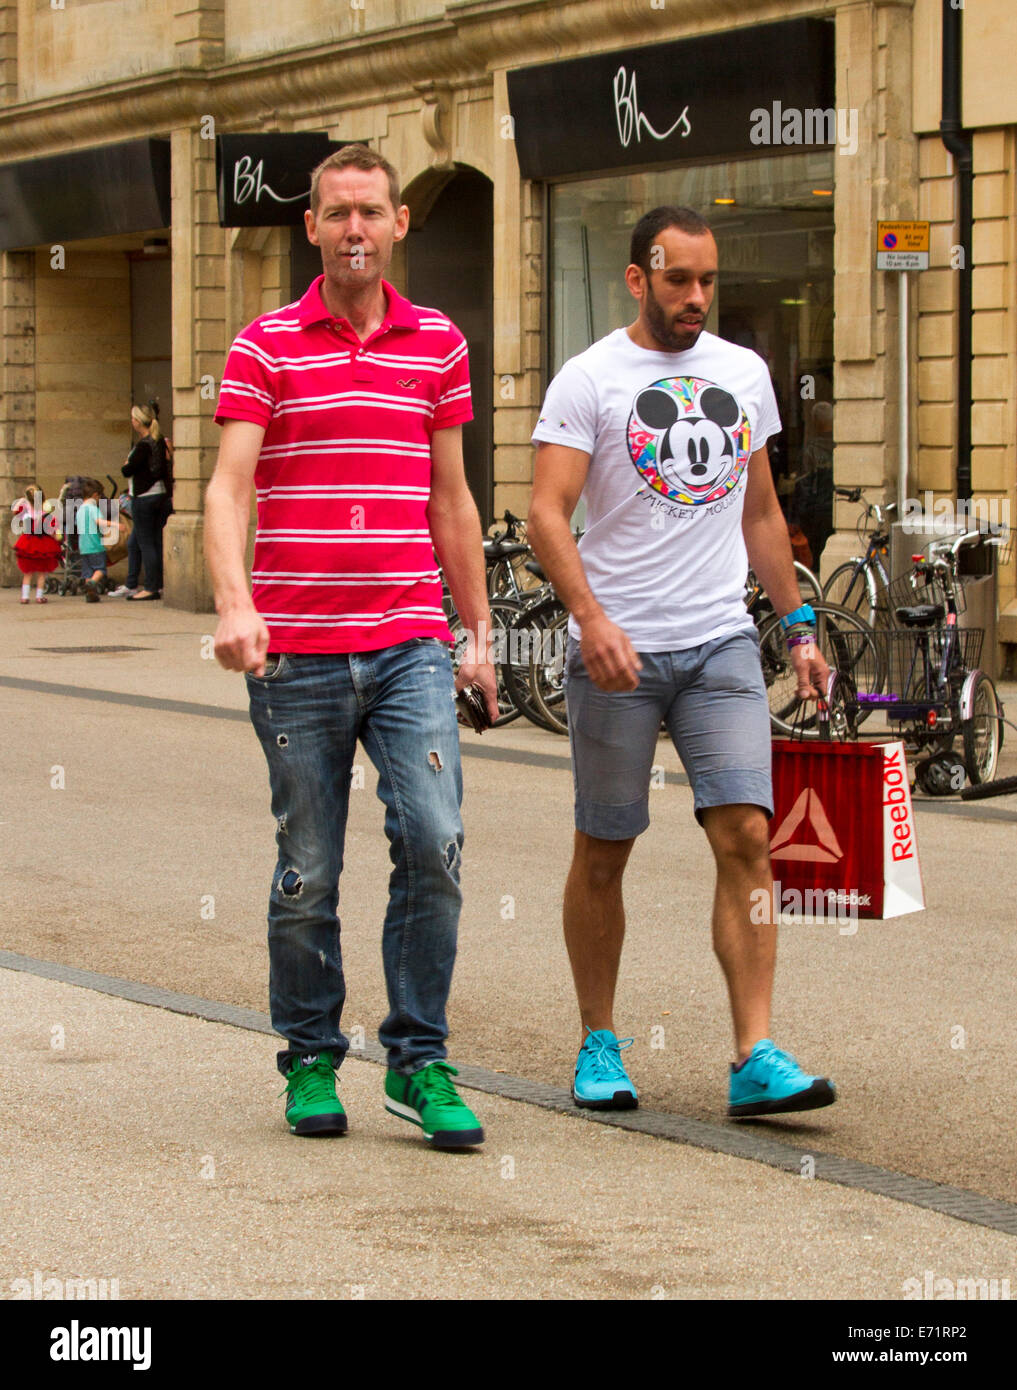 Two young men of different racial origins wearing casual clothes, one with beard and carrying shopping bag, walking along street Stock Photo